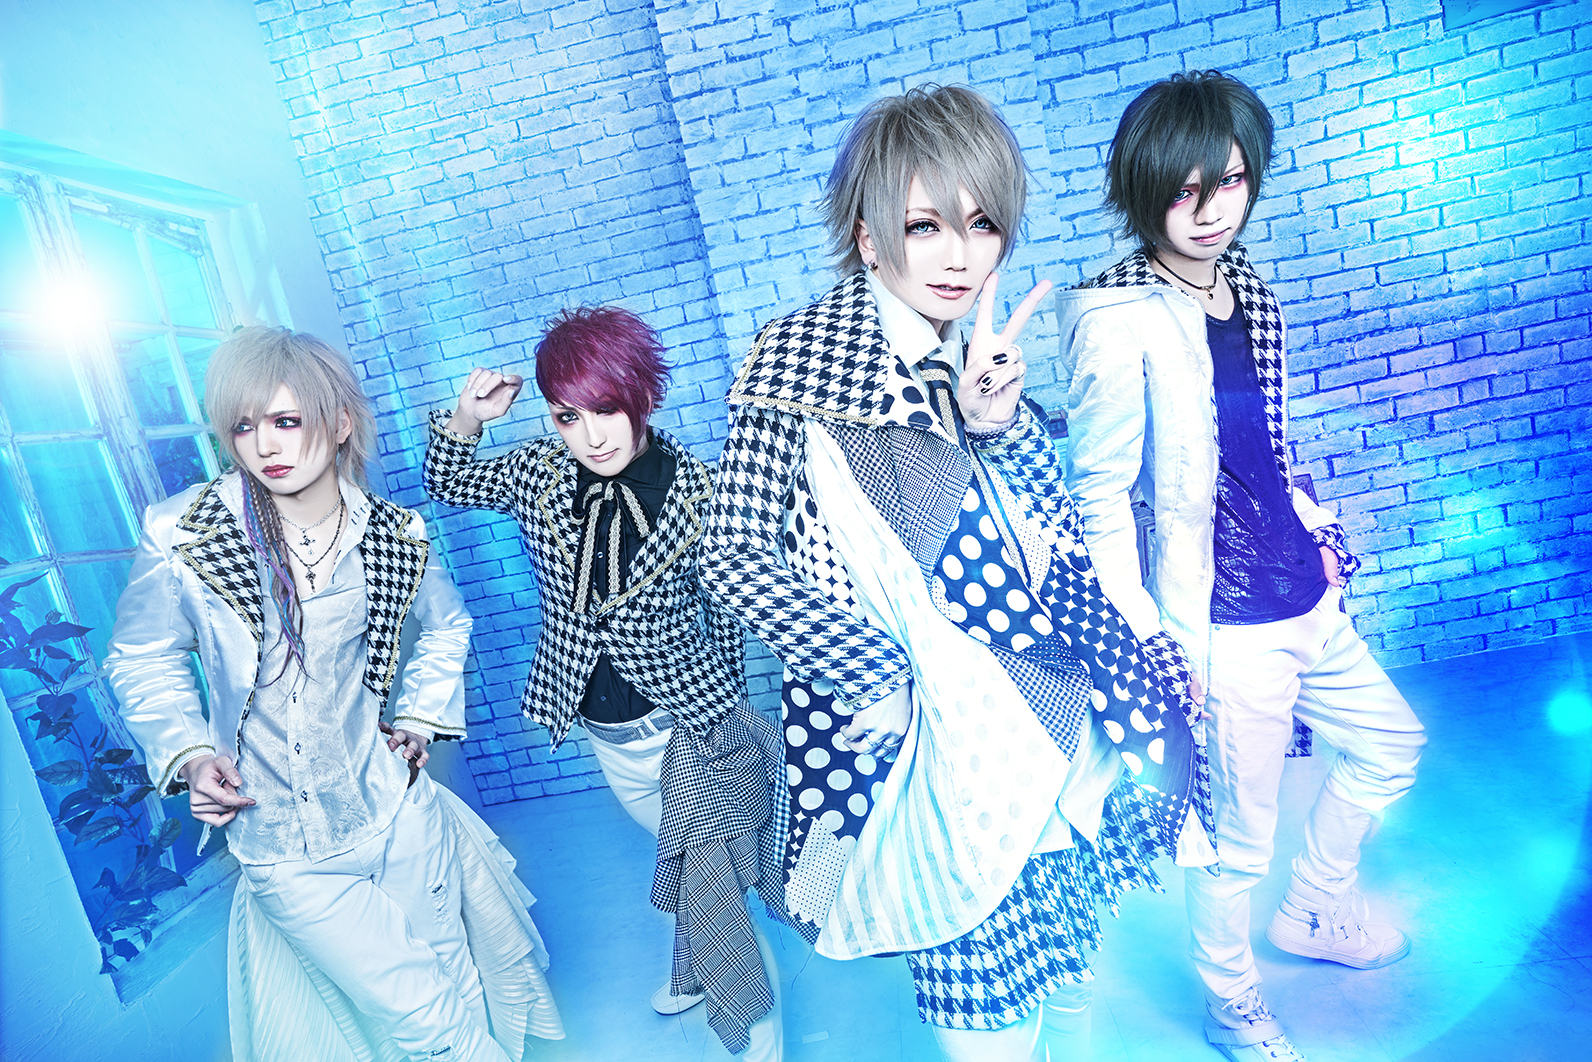 TEARCiTY will disband